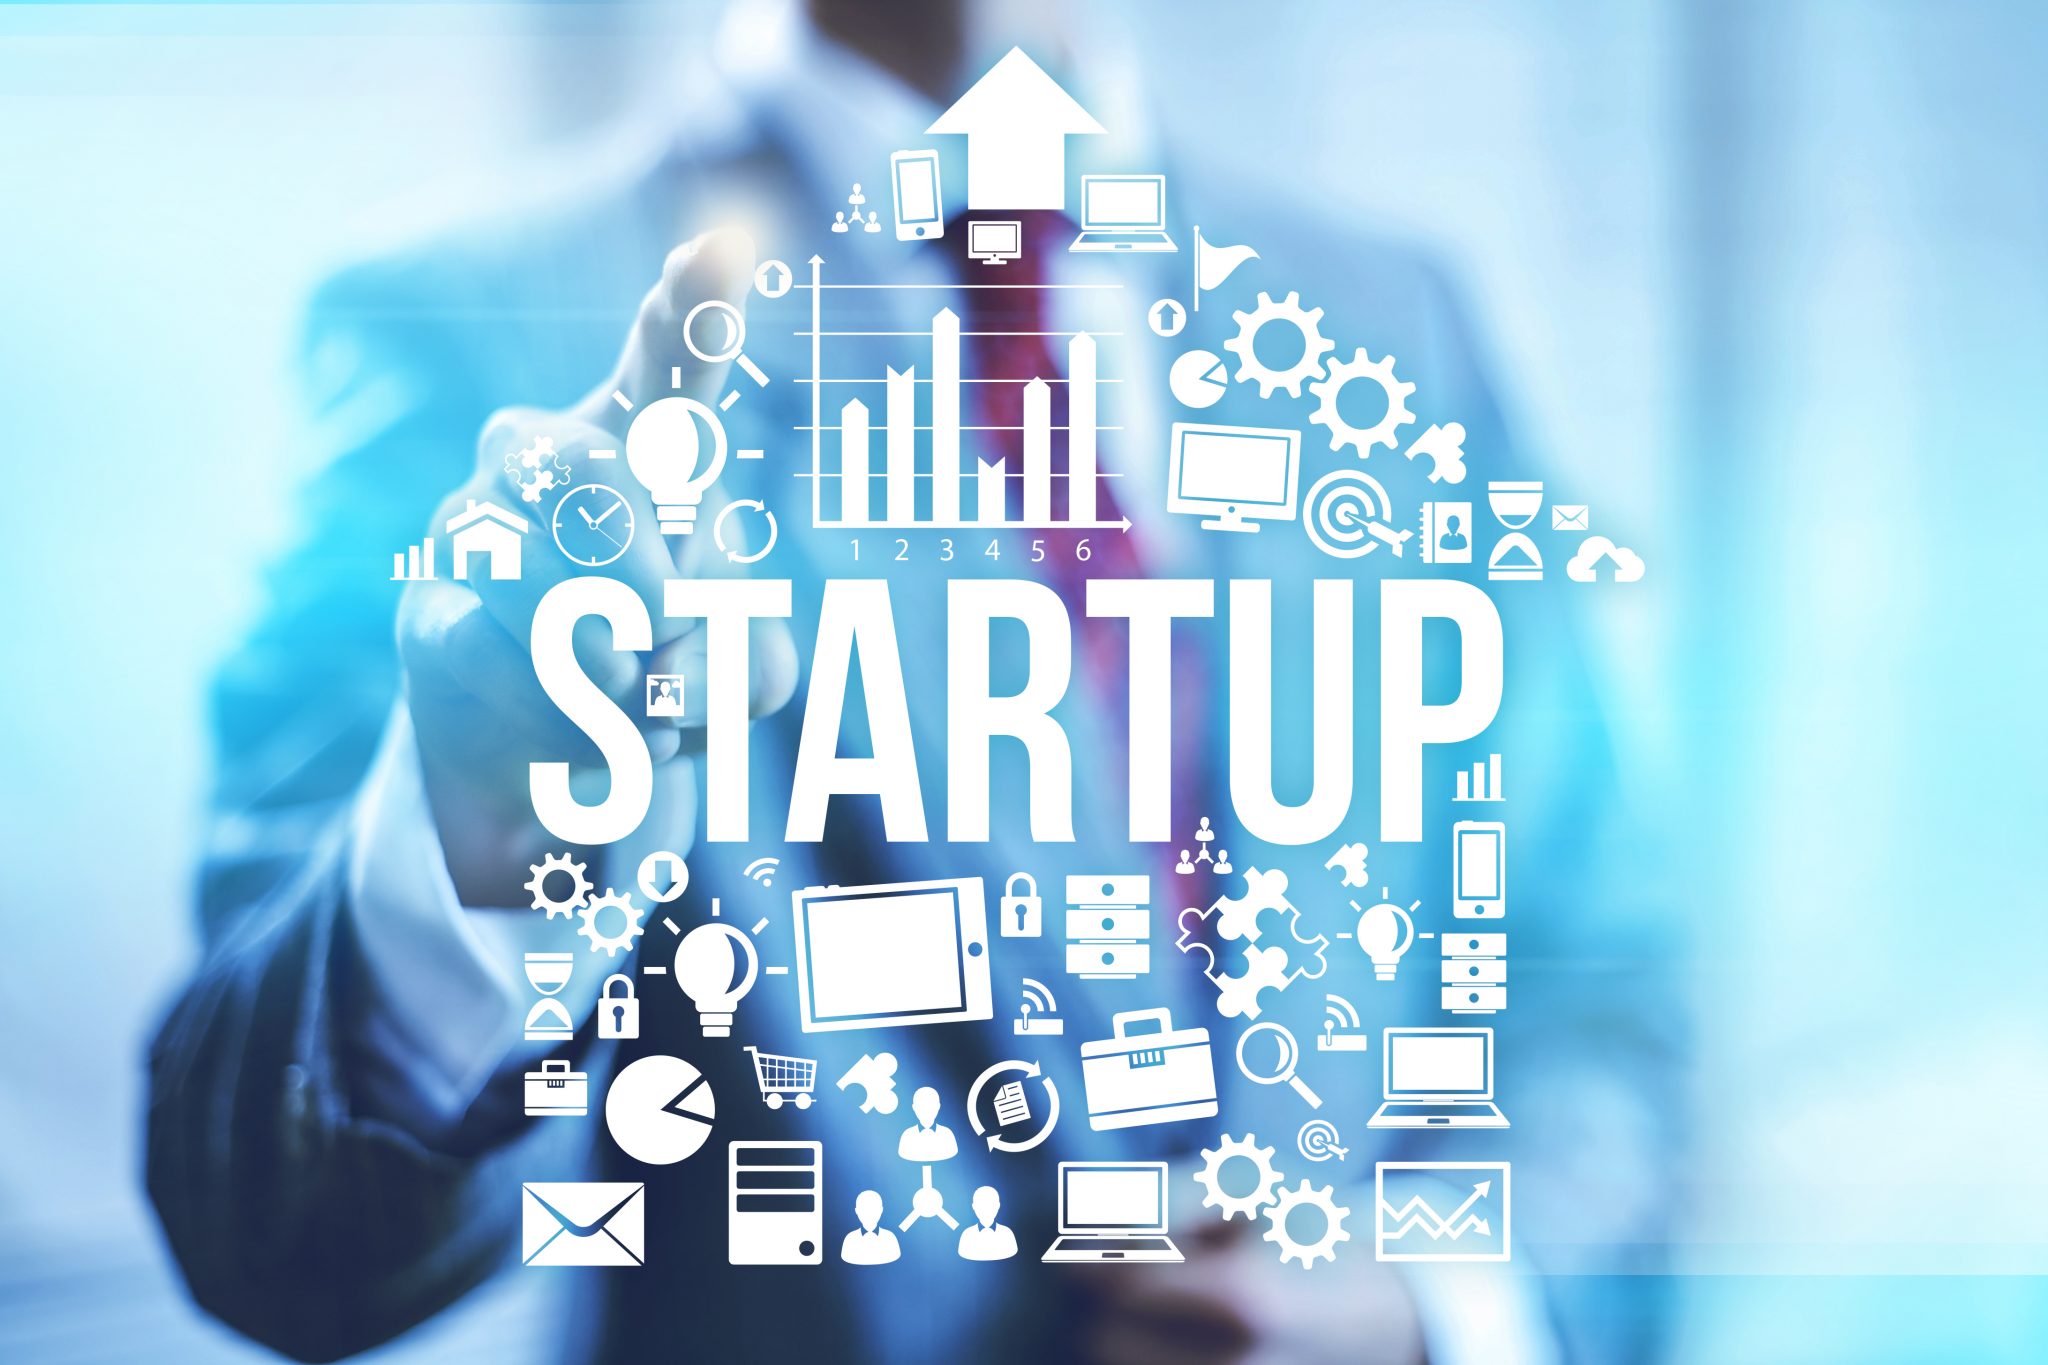 Startup Meaning and Definition